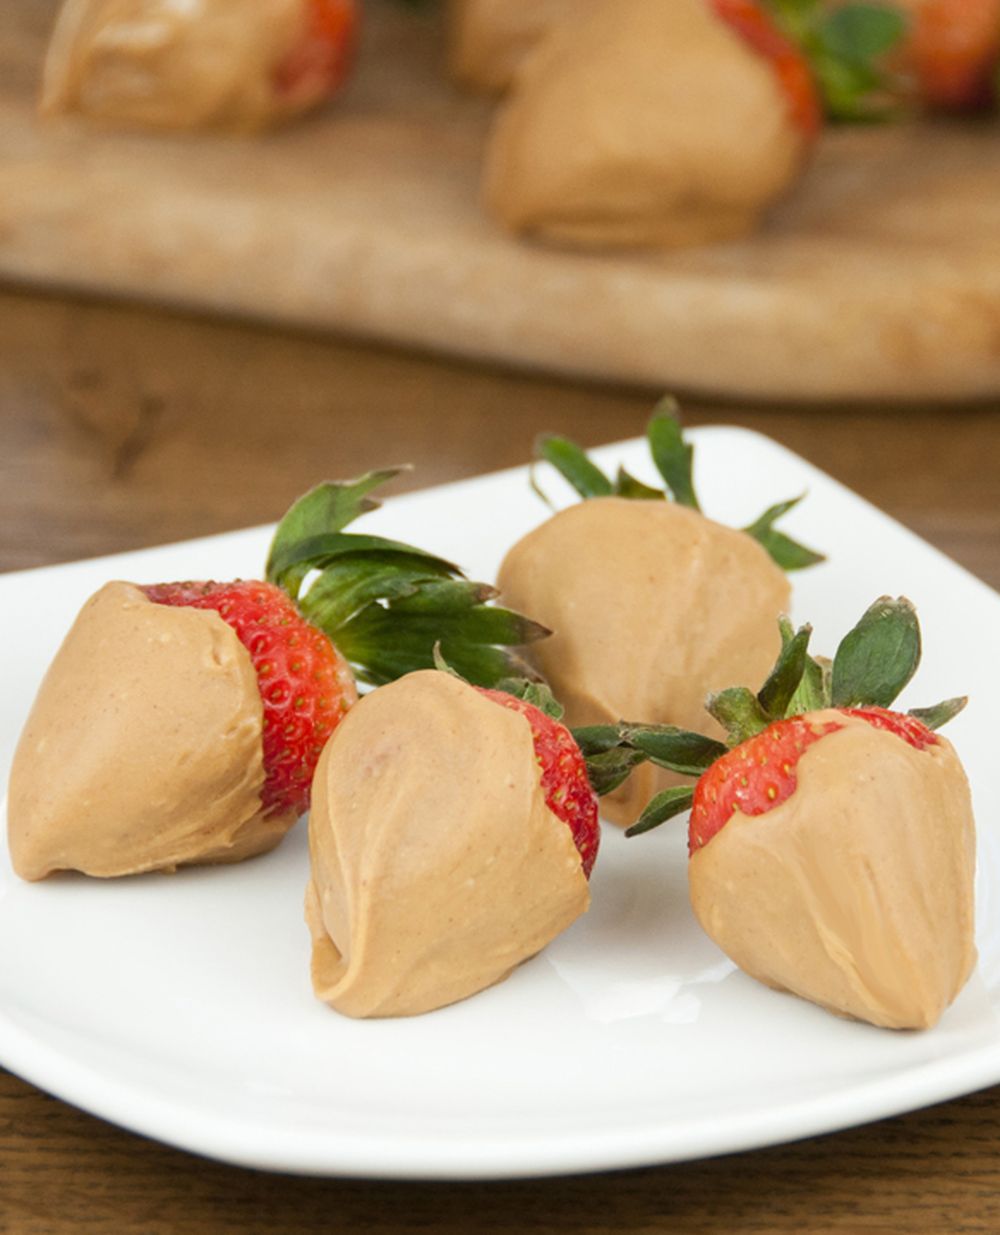 Strawberries dipped in peanut butter valentine strawberries 